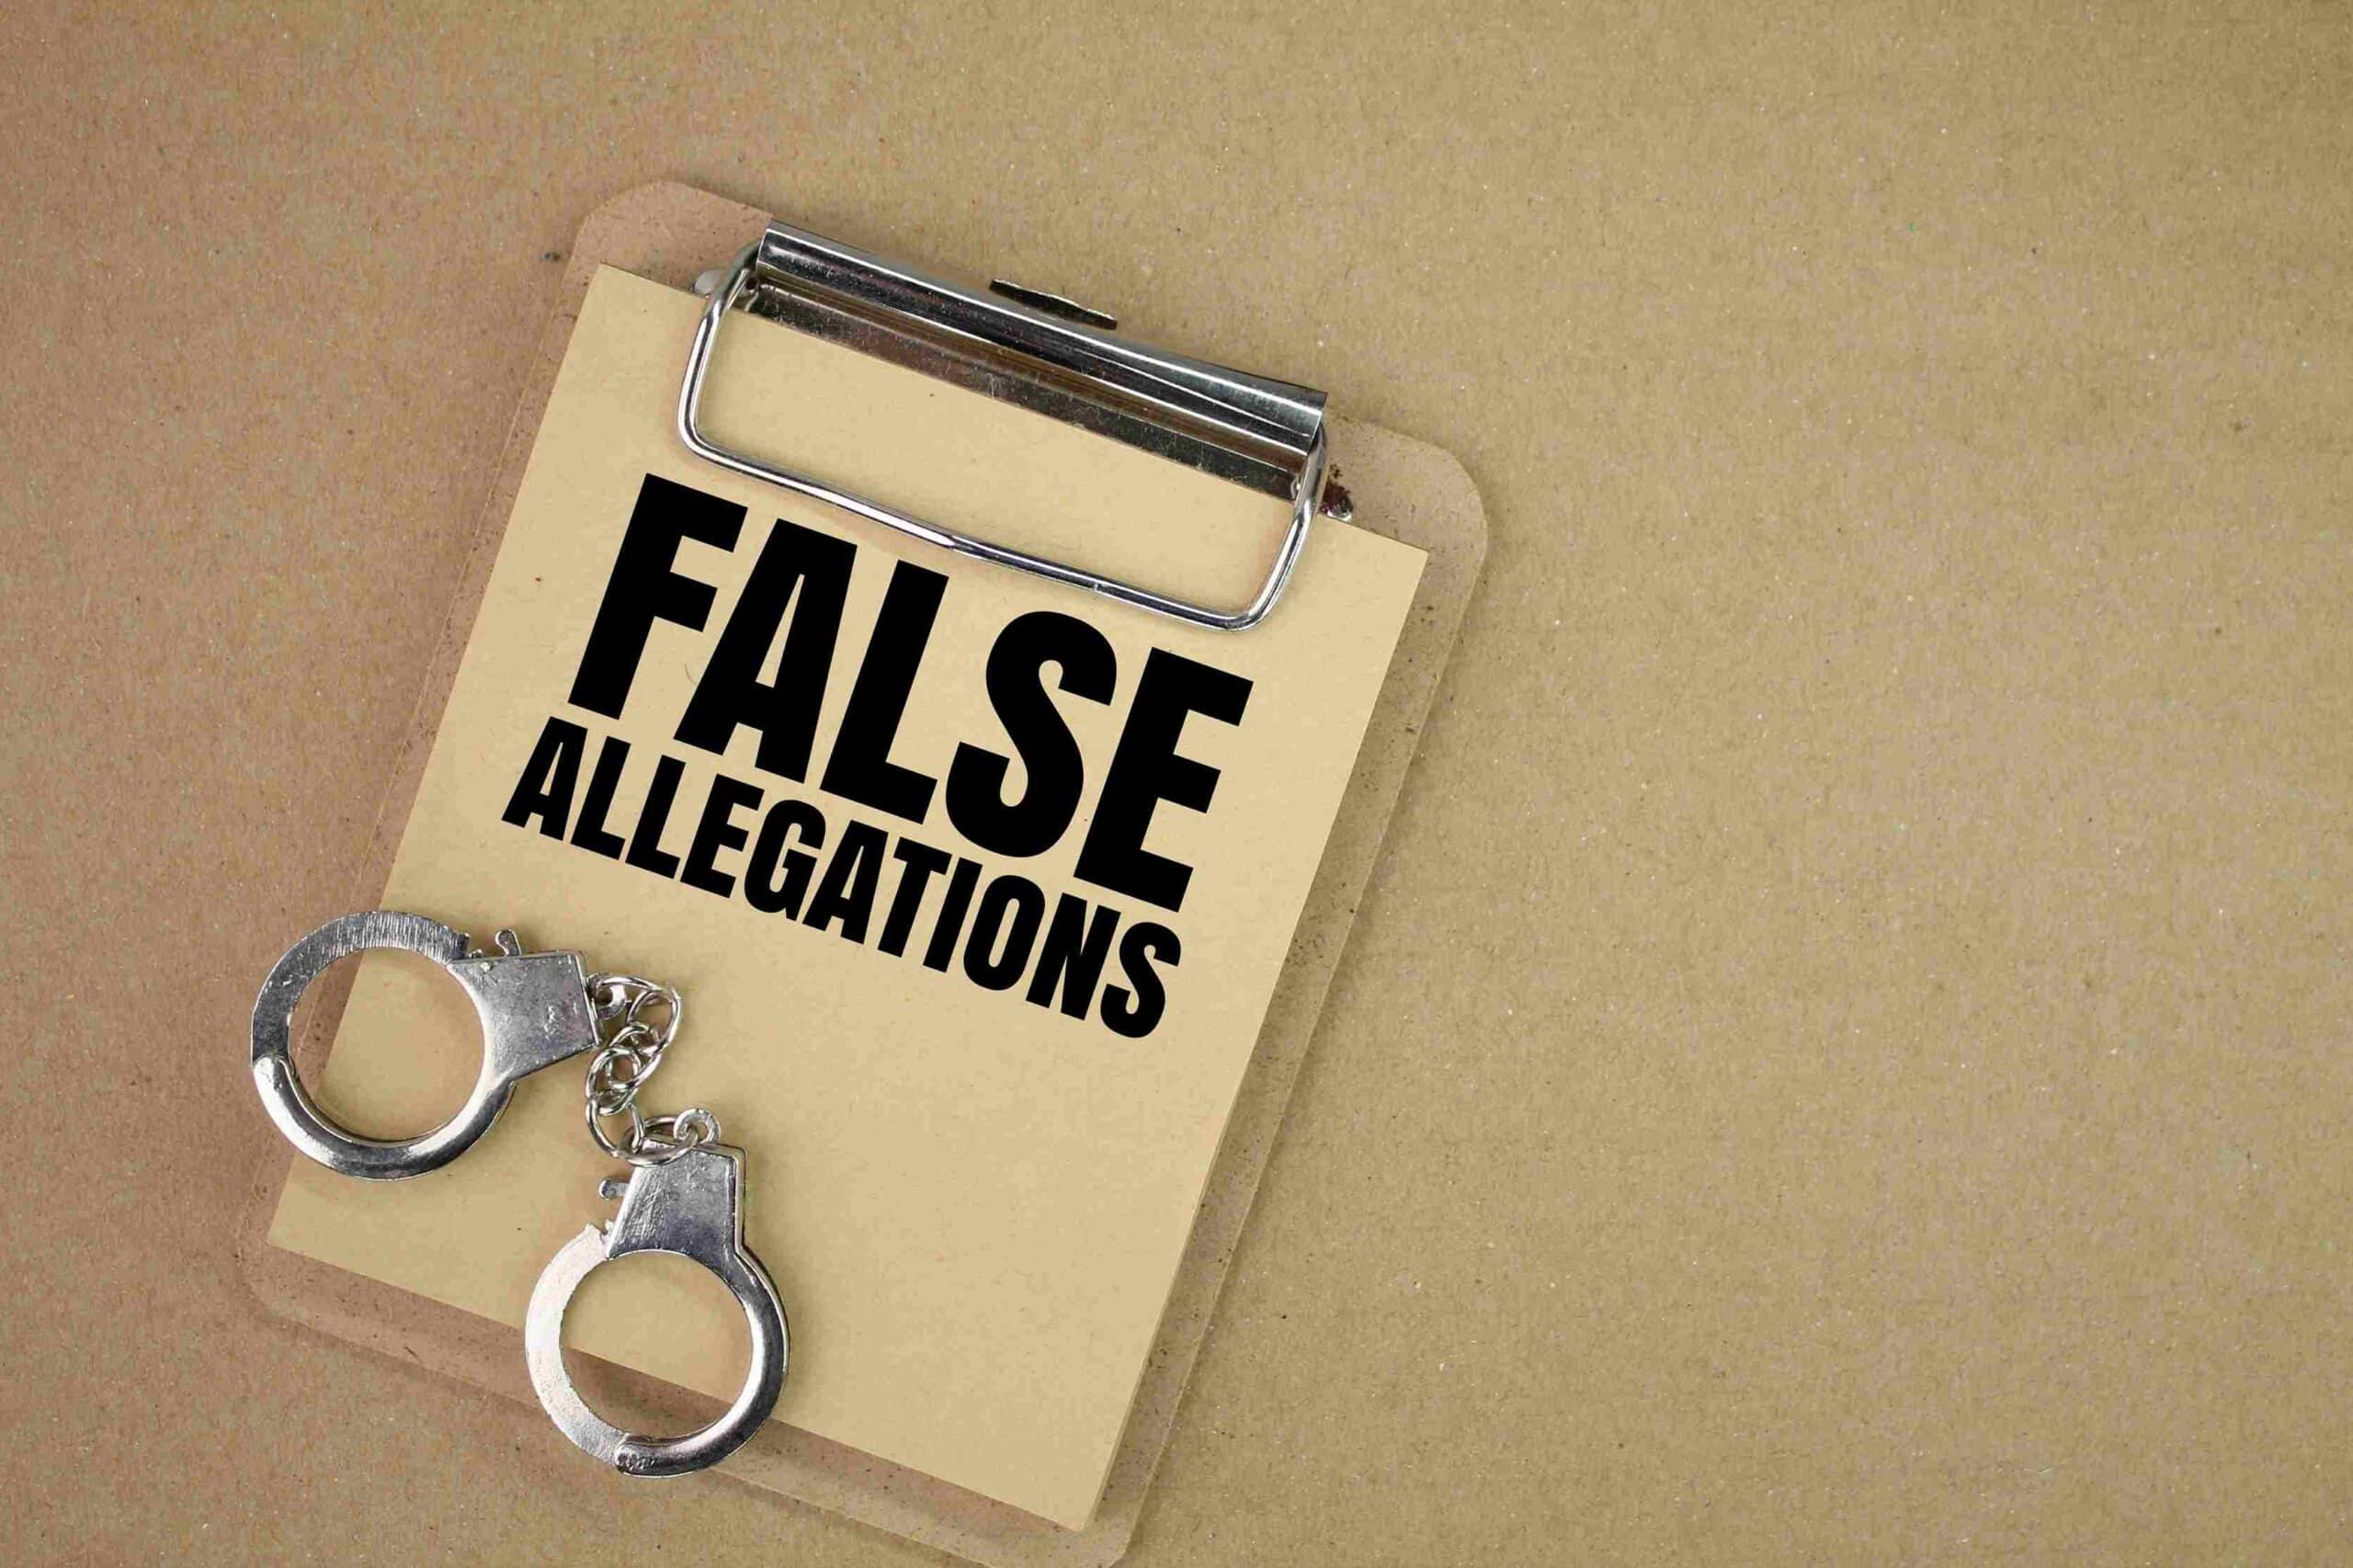 How to Safeguard Yourself Against False Allegations